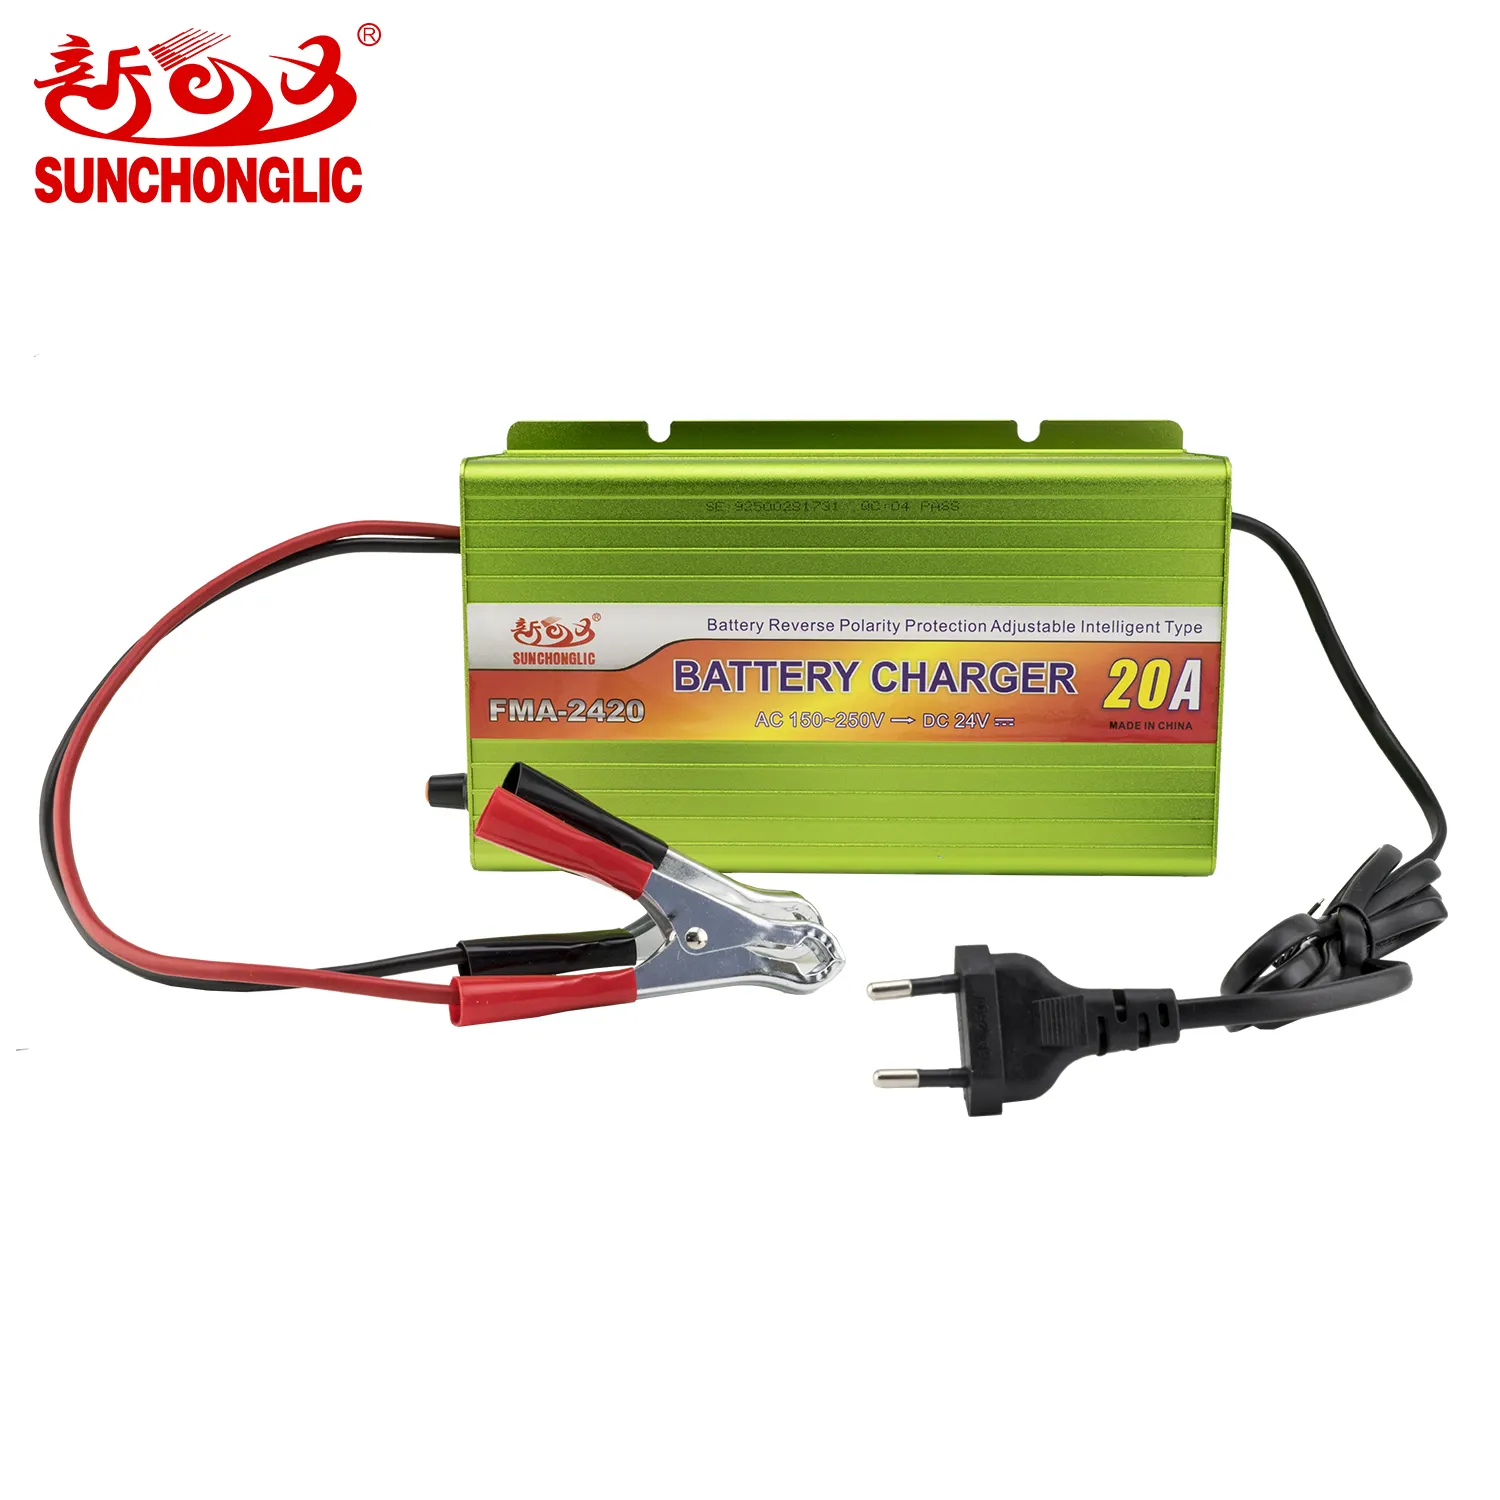 Sunchonglic AC to DC24V 20A Three-Phase Charging Mode Auto Smart Fast Standard Battery Charger